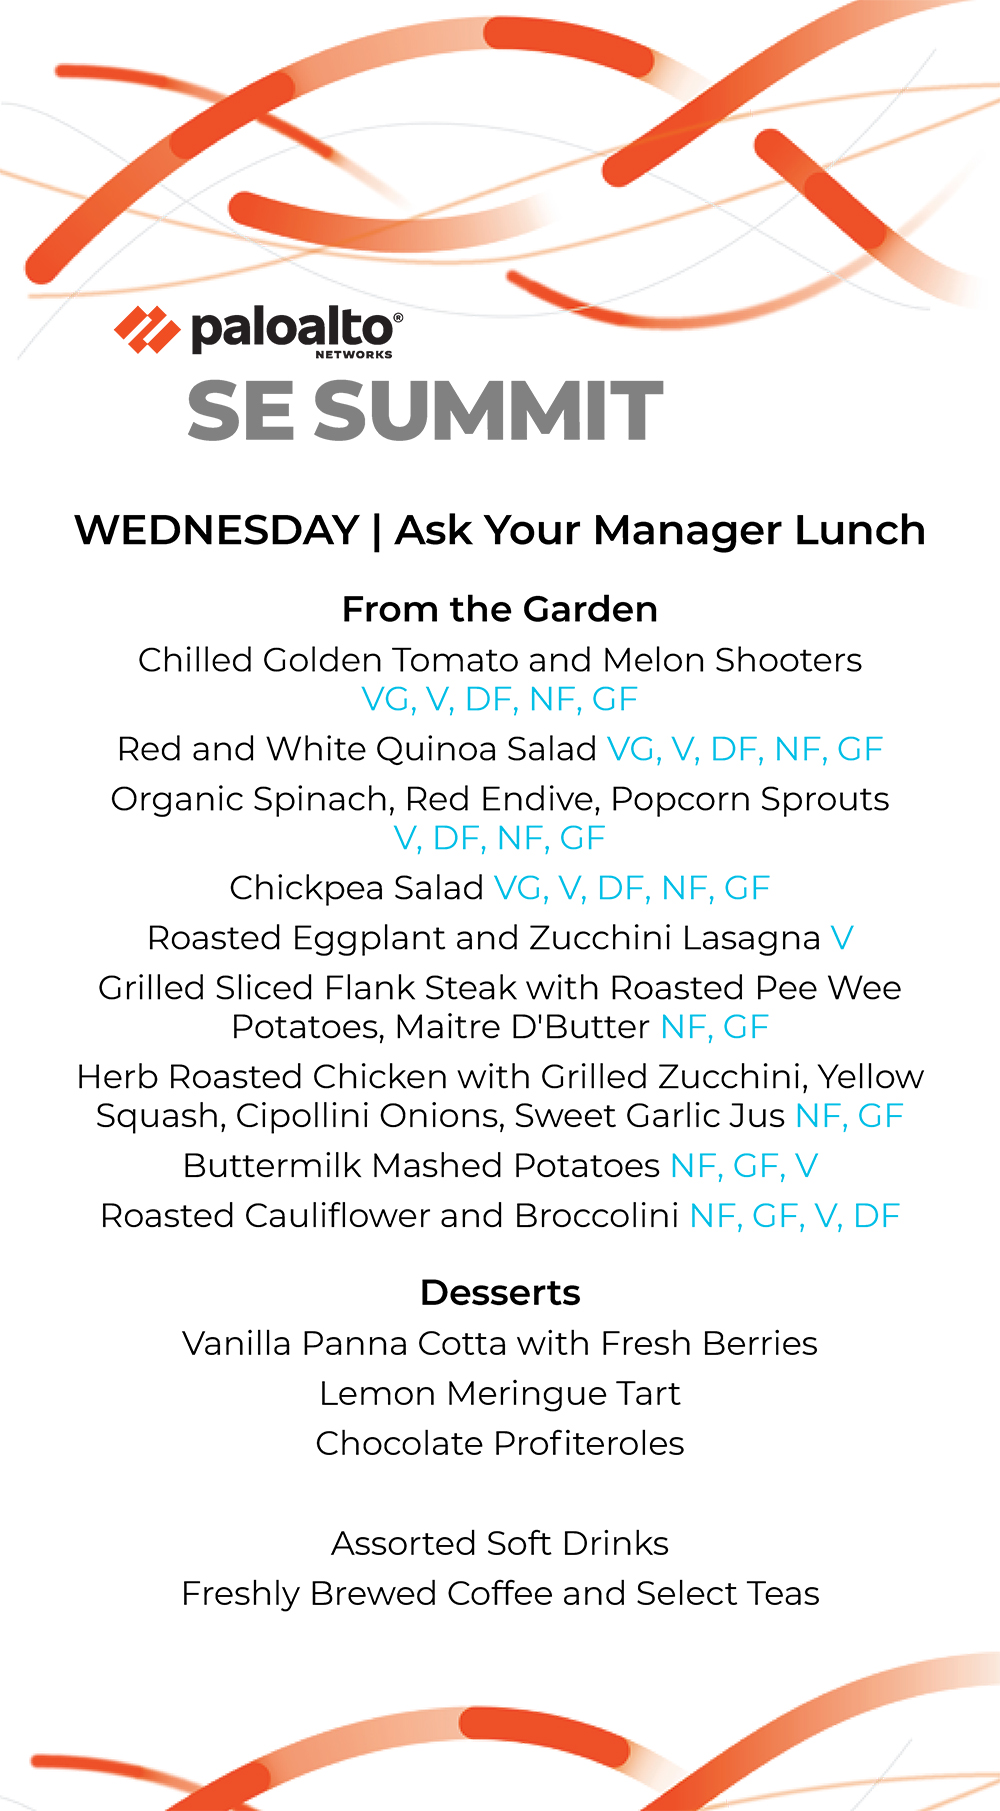 <div style="margin-left:22px;">Ask Your Manager Lunch</div>